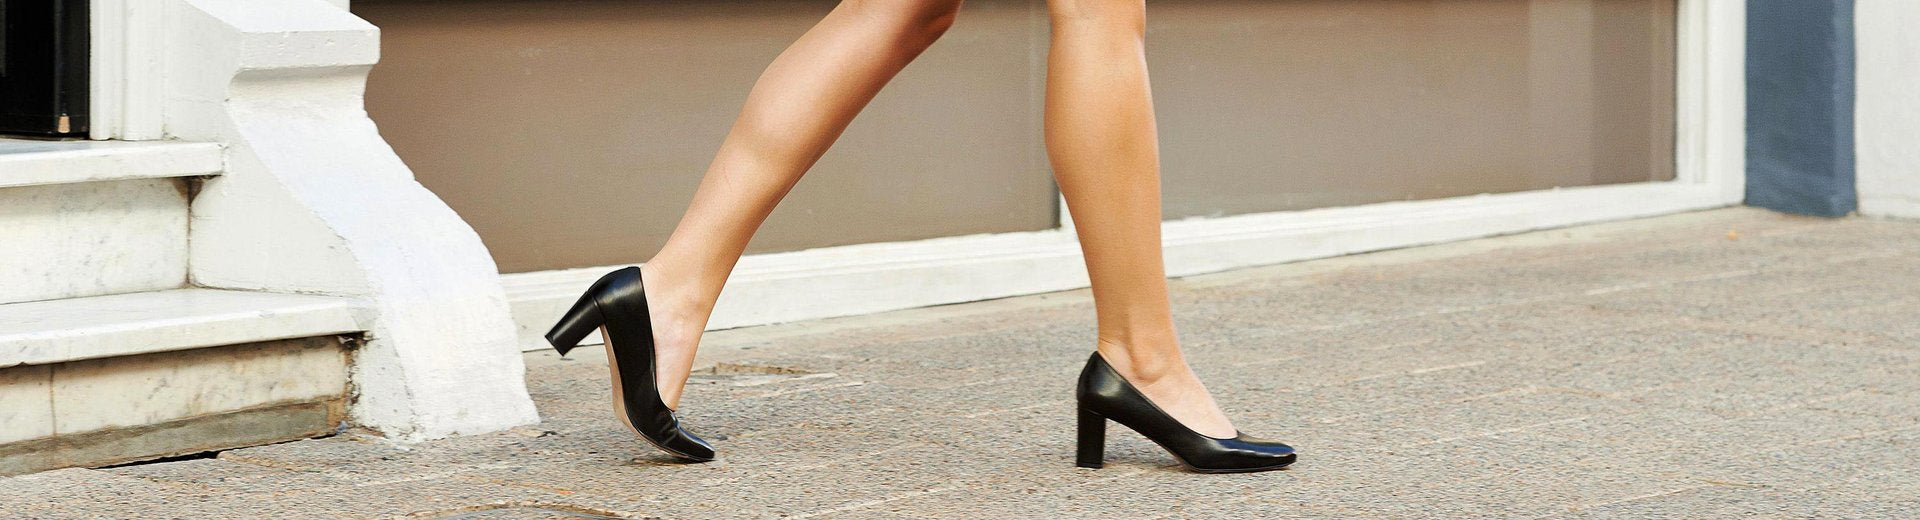 The Most Comfortable Heels for Women by former flight attendant